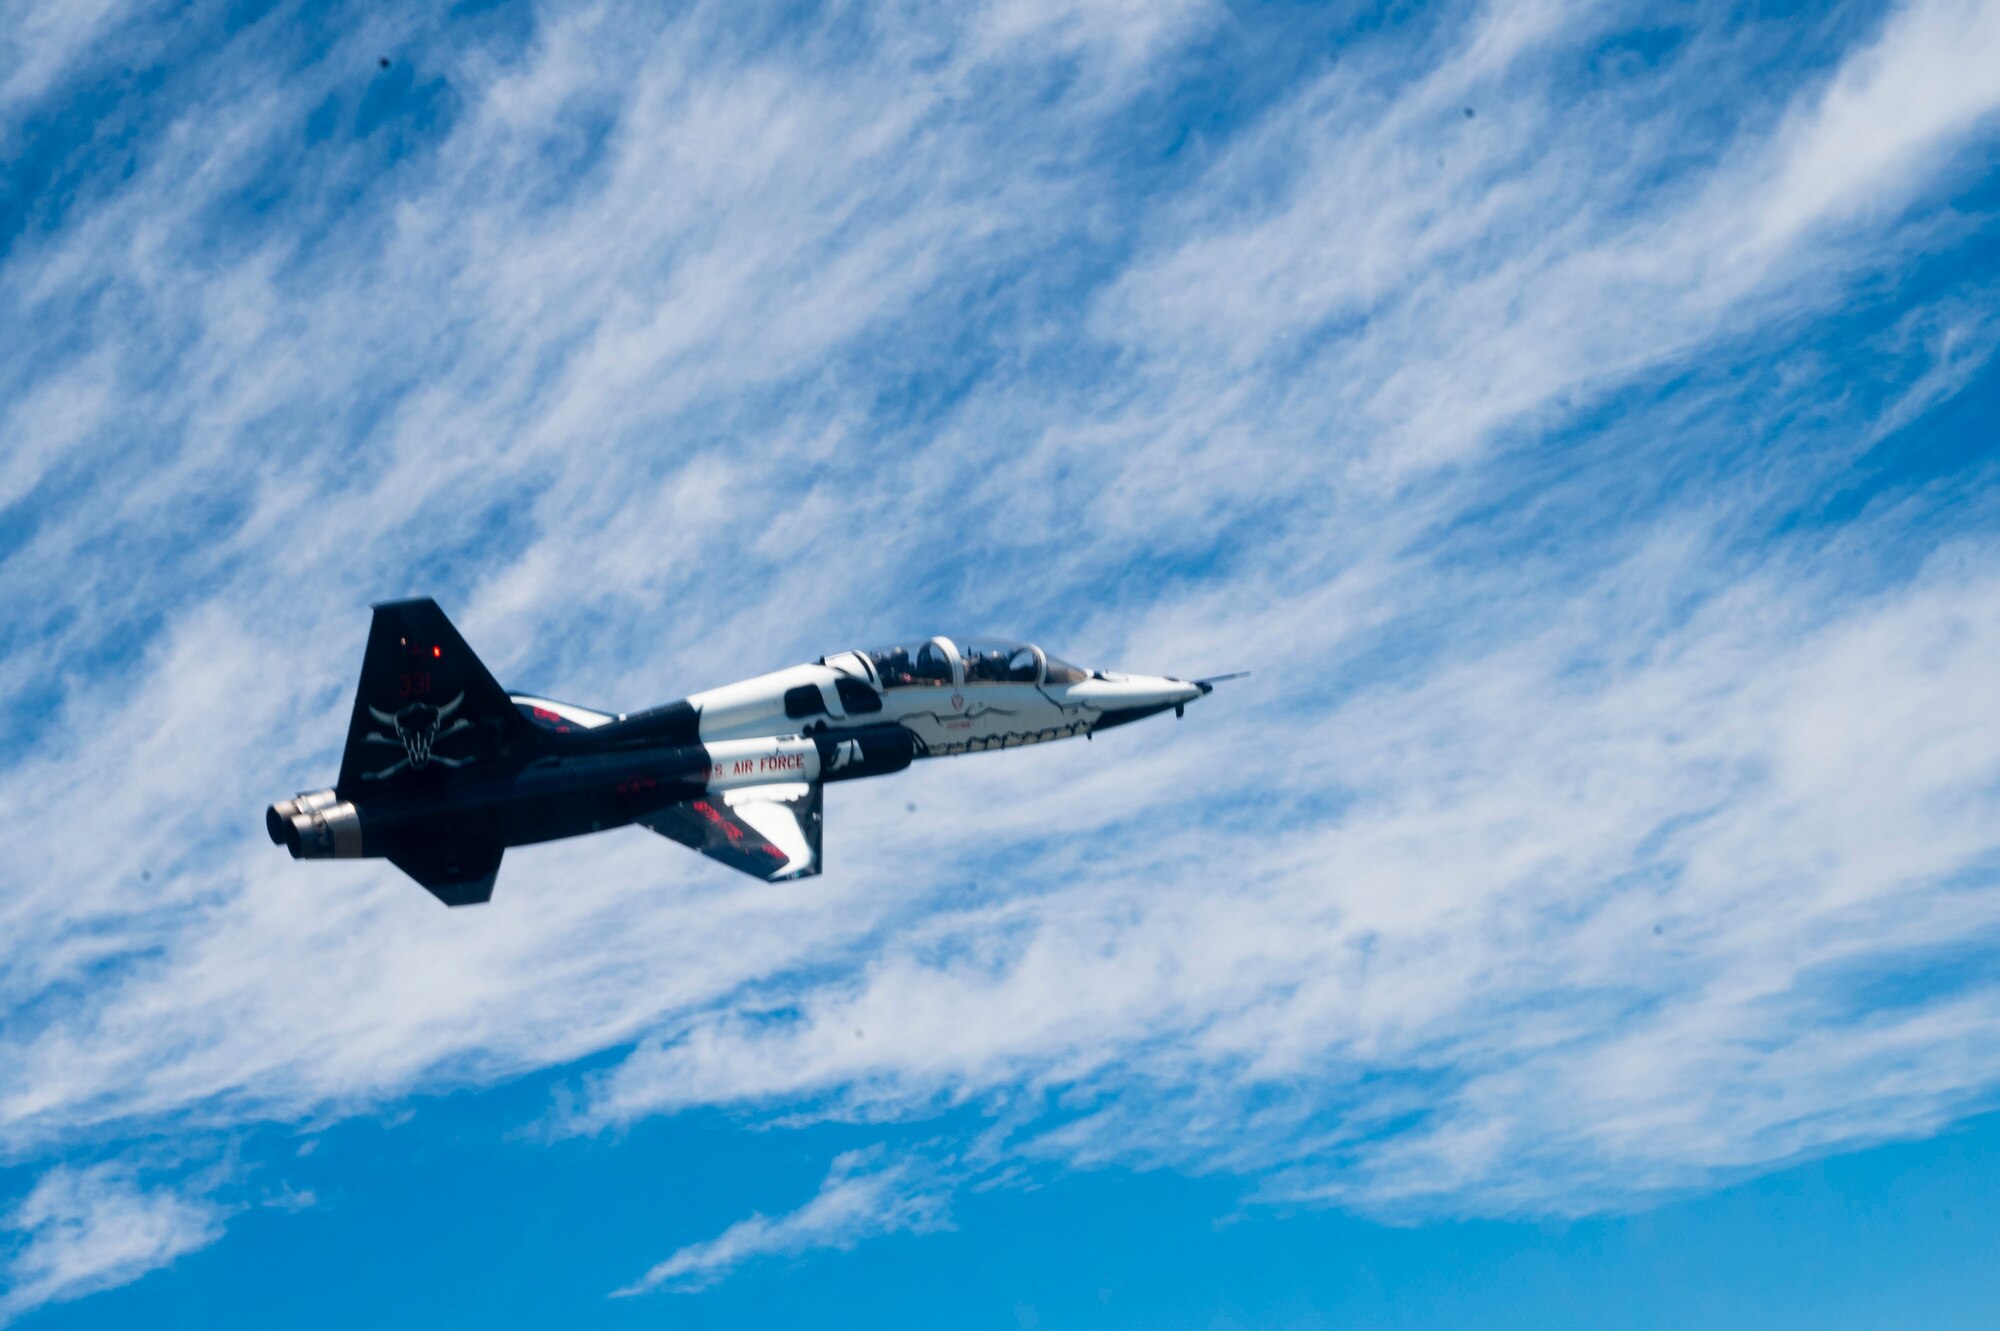 A T-38 Talon performs in the Wings Over South Texas air show on May 2. 2021, in Corpus Christi Texas. This is the heritage tail of the 87th Flying Training Wing and it is the heart of the T-38 fleet at Laughlin. (u.s. Air Force photo by Airman 1st Class David Phaff)